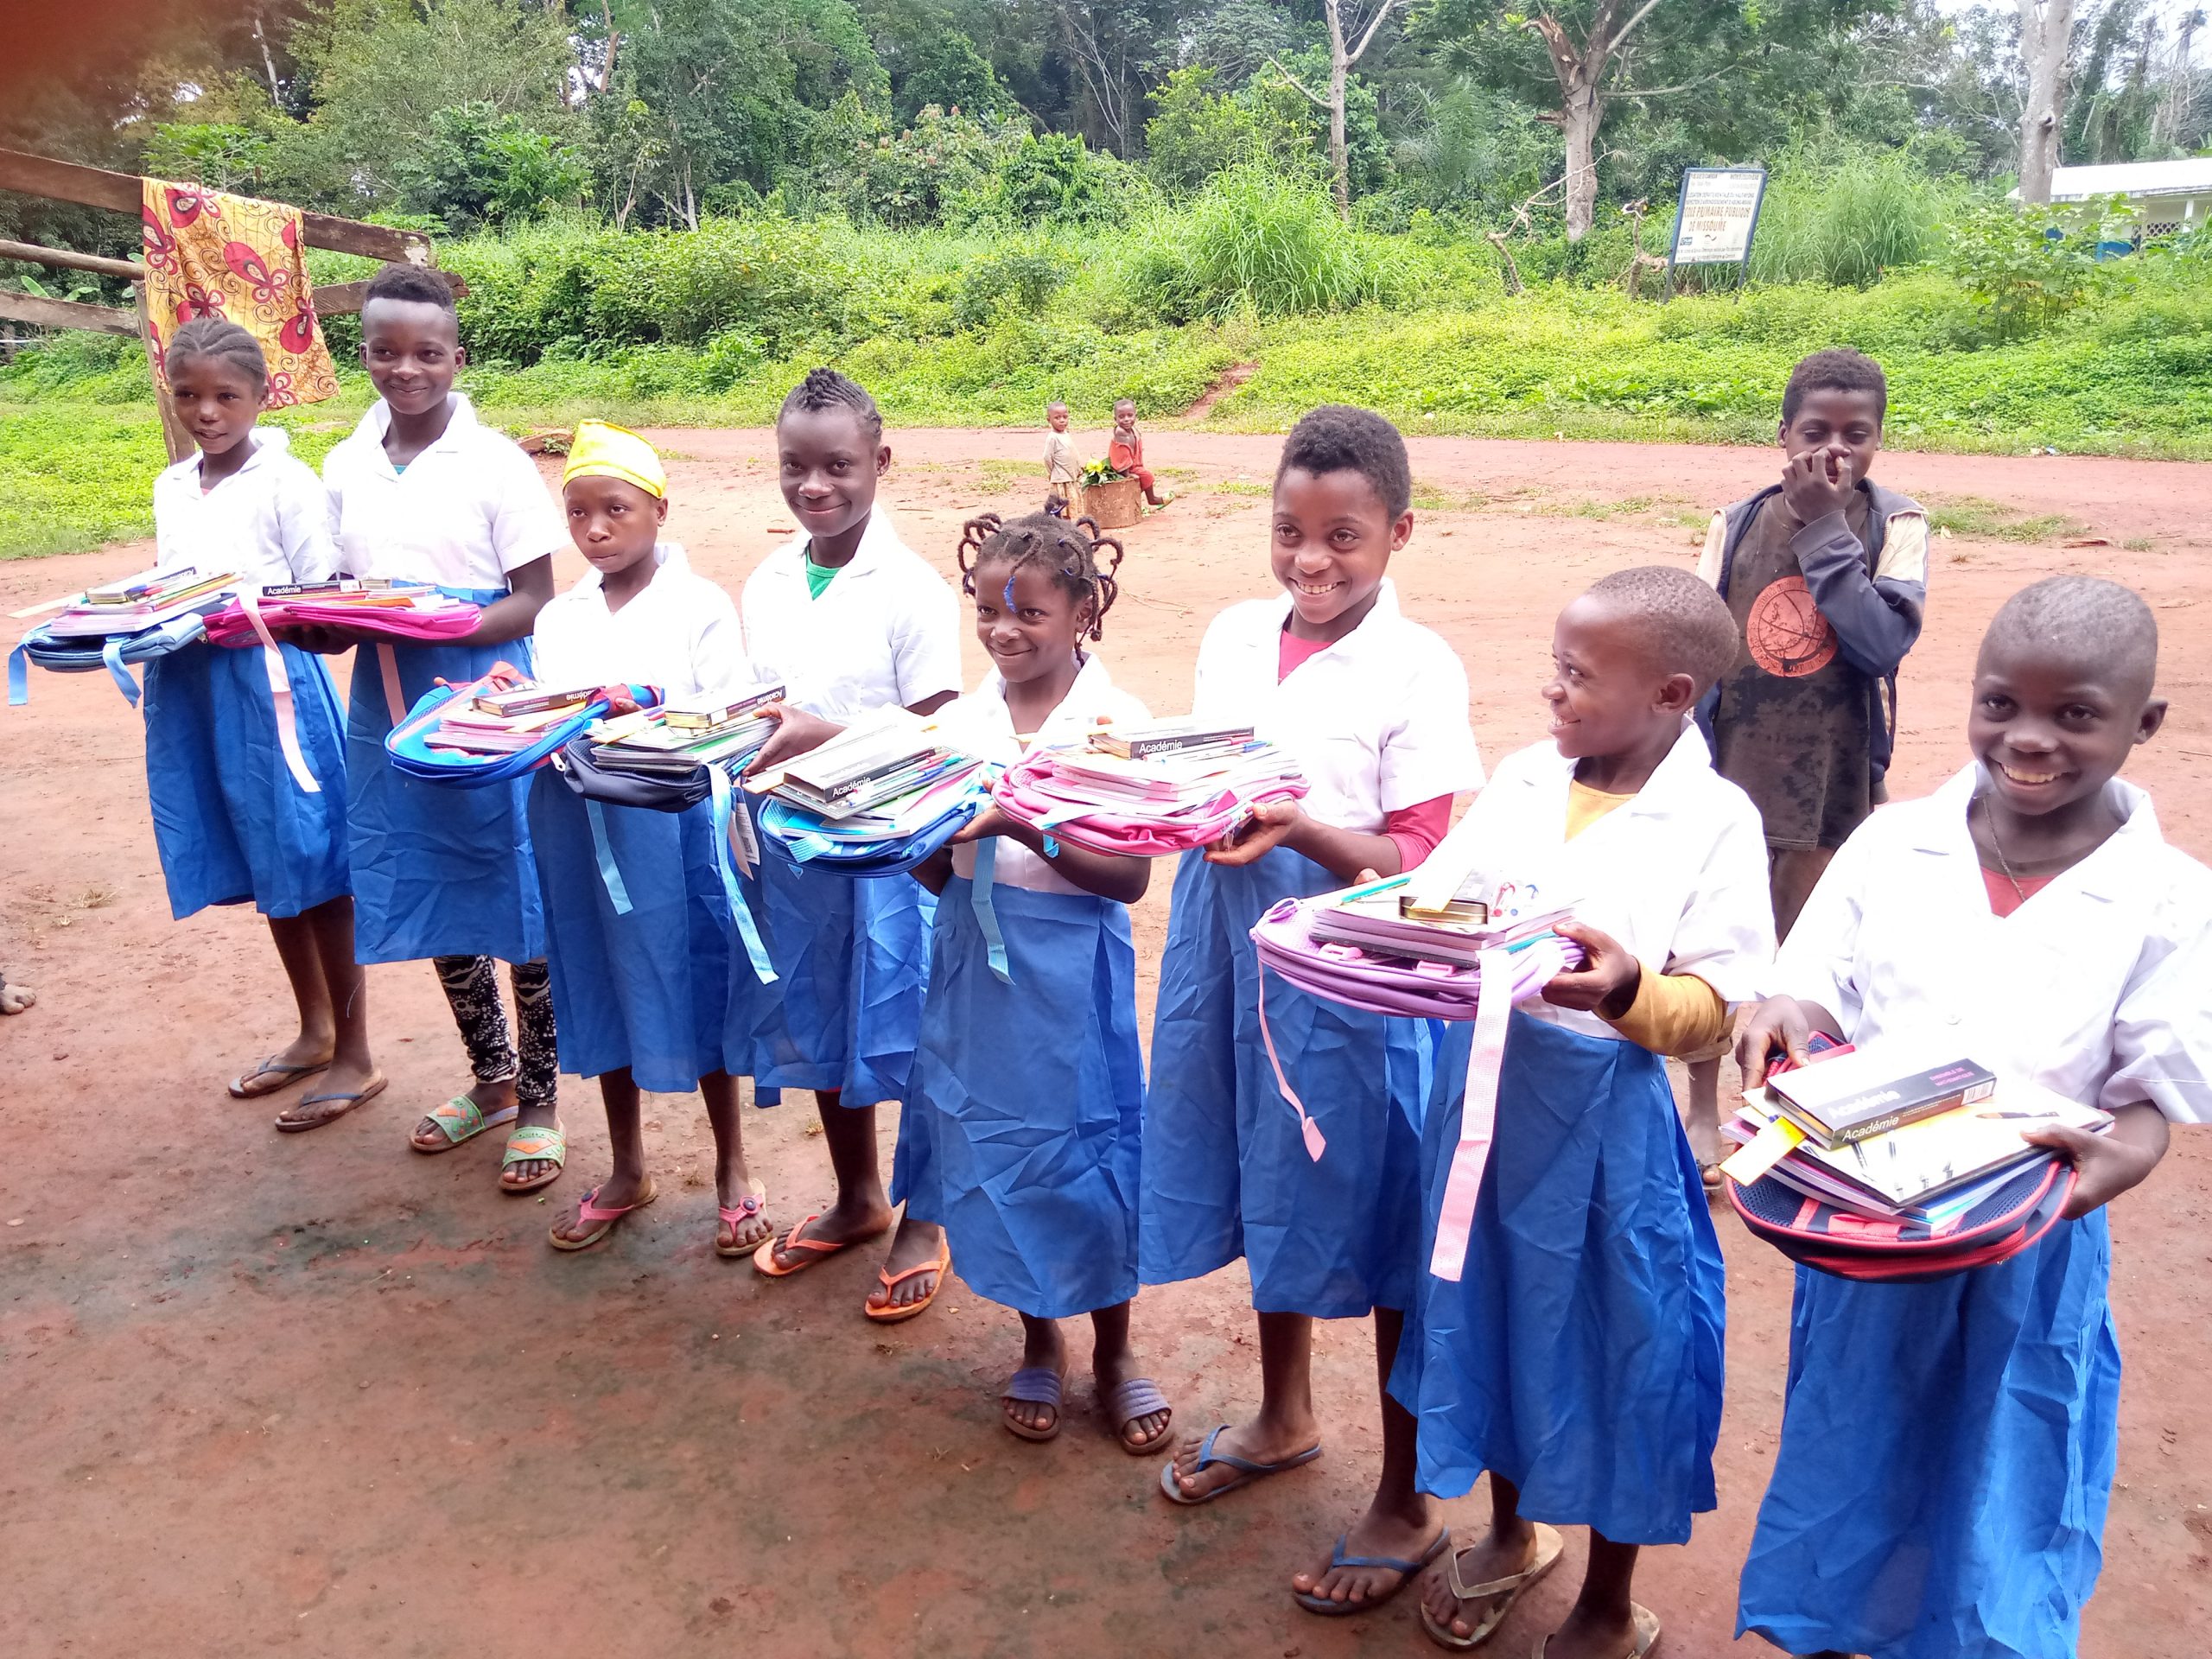 Enrolment of young girls from indigenous communities in schools and provision of basic